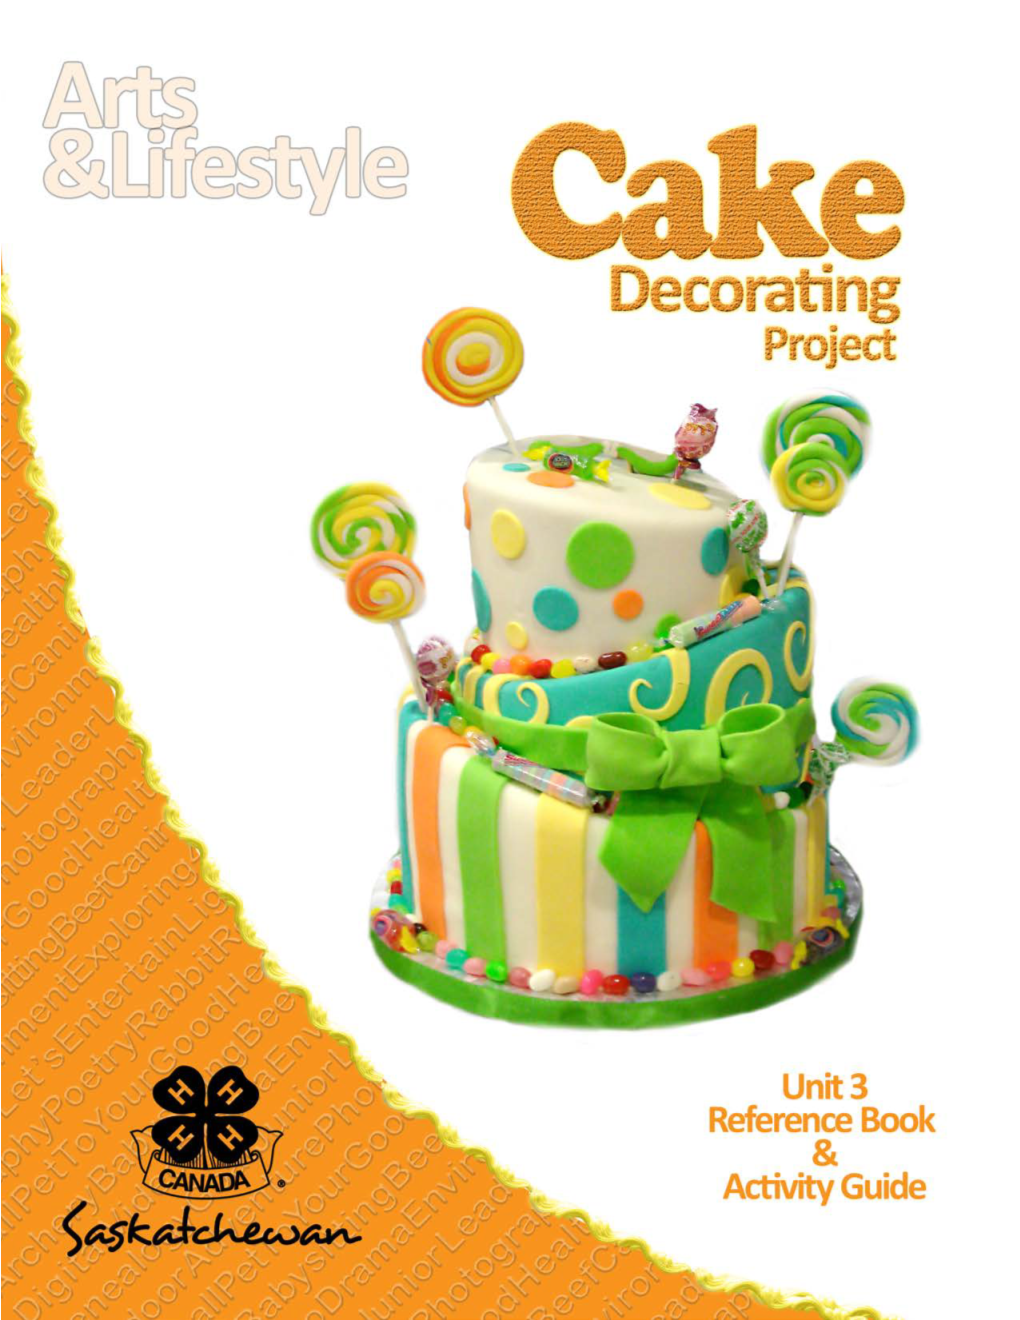 Covering Cakes with Fondant